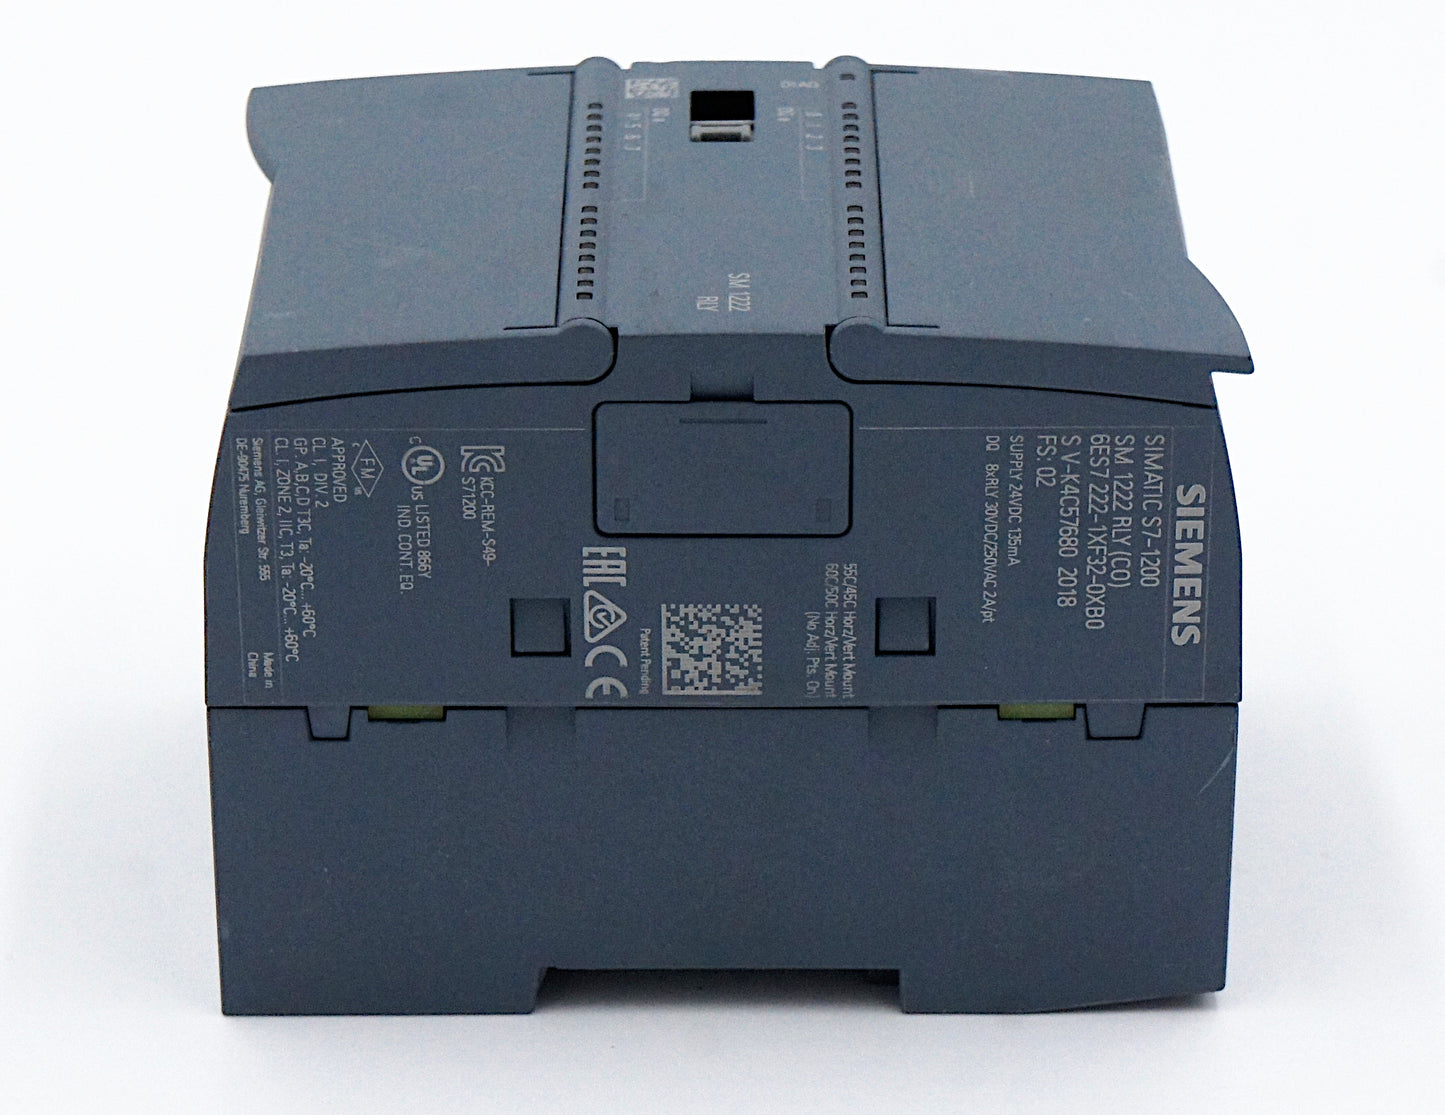 Siemens Simatic SM-1222 RLY S7-1200 Compact Relay Module